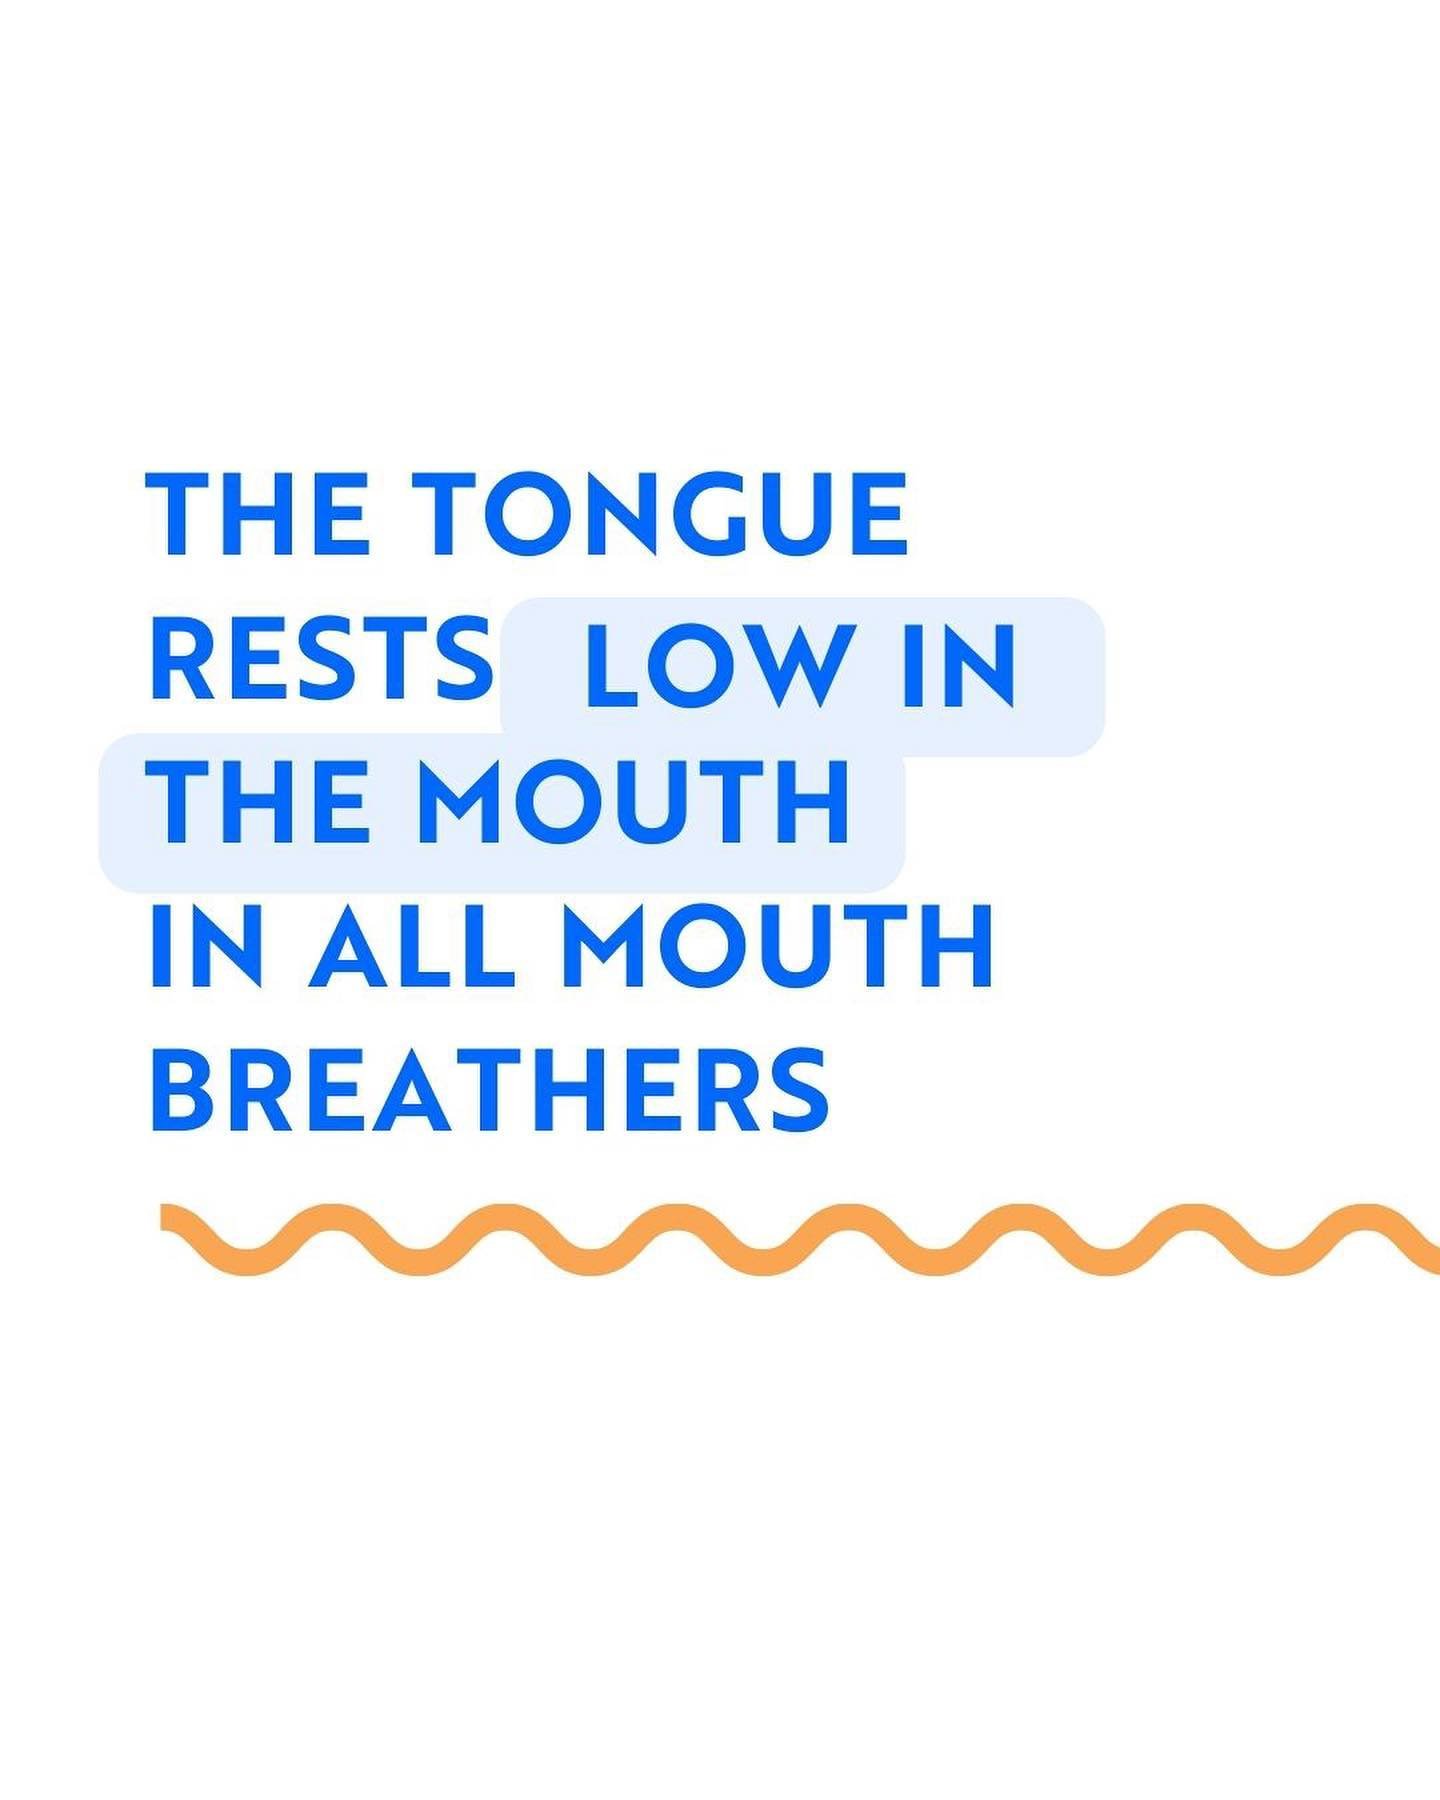 But why does that matter?

#tongueposture #tongue #lowtongue #mouthbreathing #mouthbreather #openmouth #closedmouthbreathing